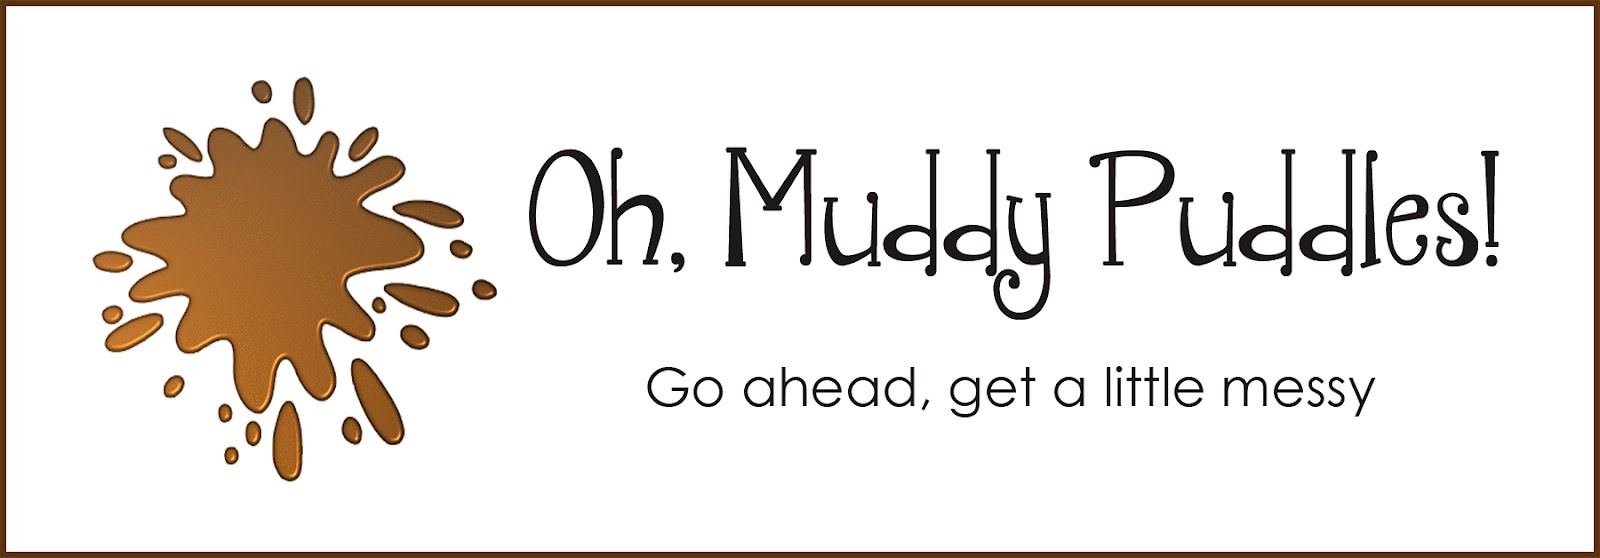 Oh, Muddy Puddles!